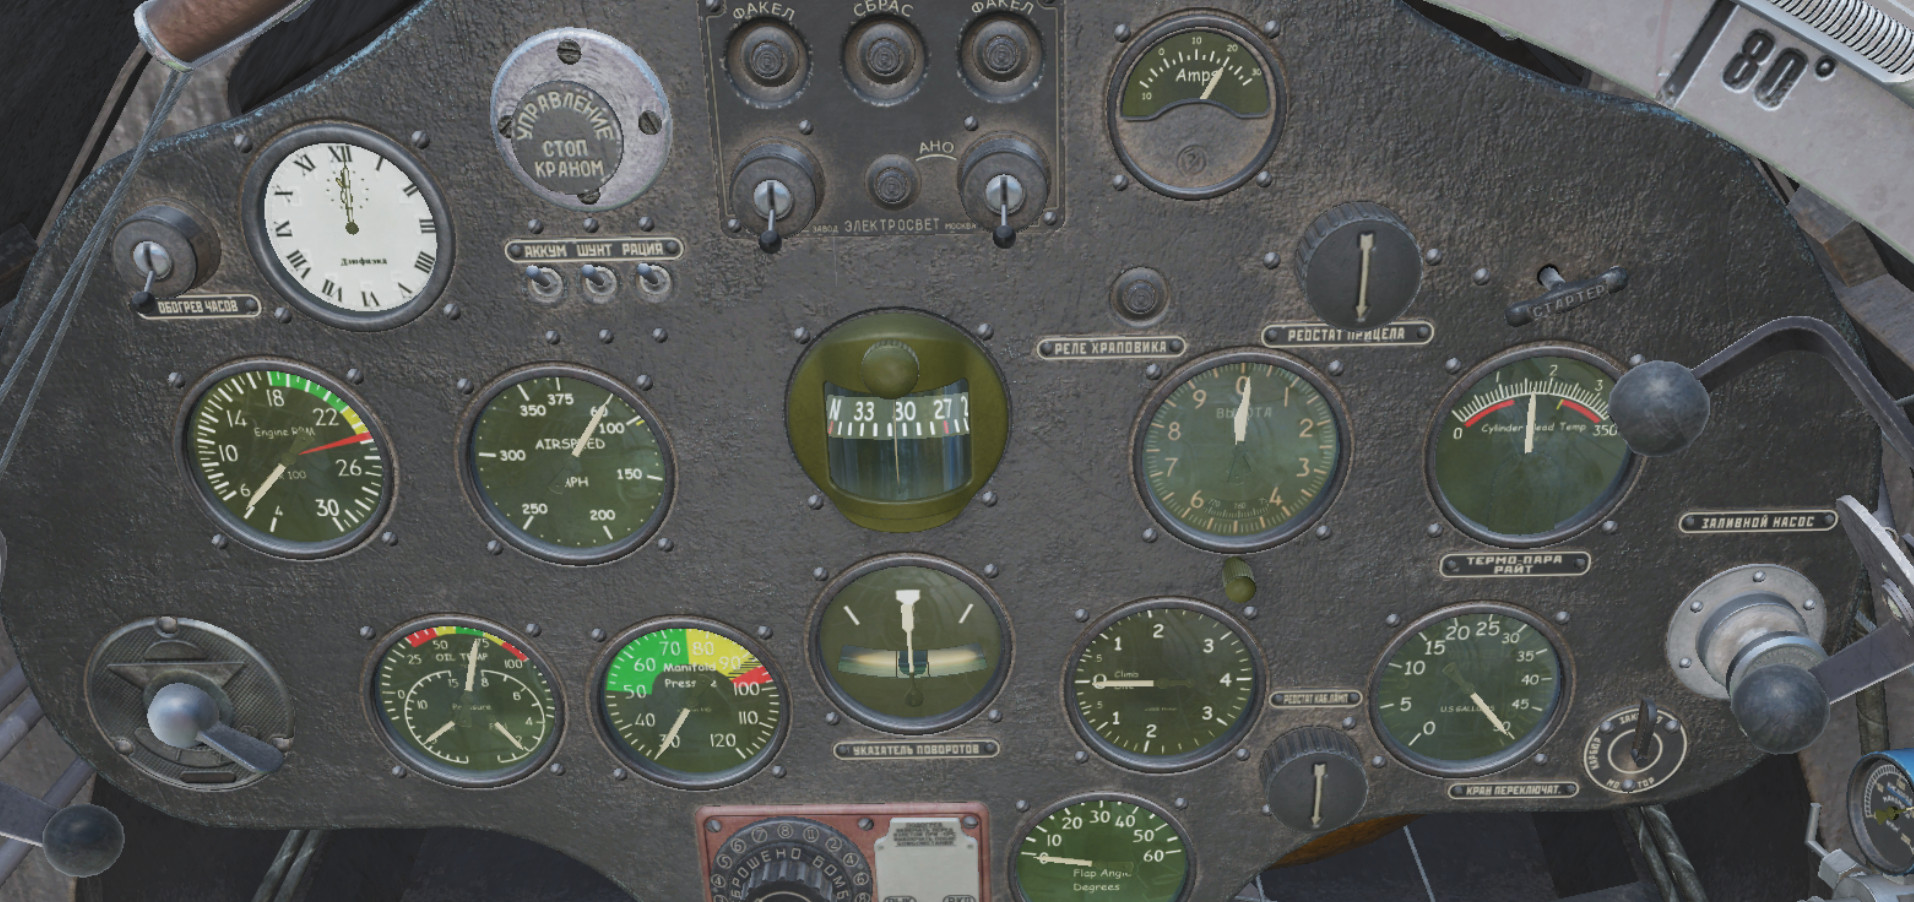 I-16 Cockpit in Imperial units (MPH, FT/min, Gallons) with Engine Management Colors